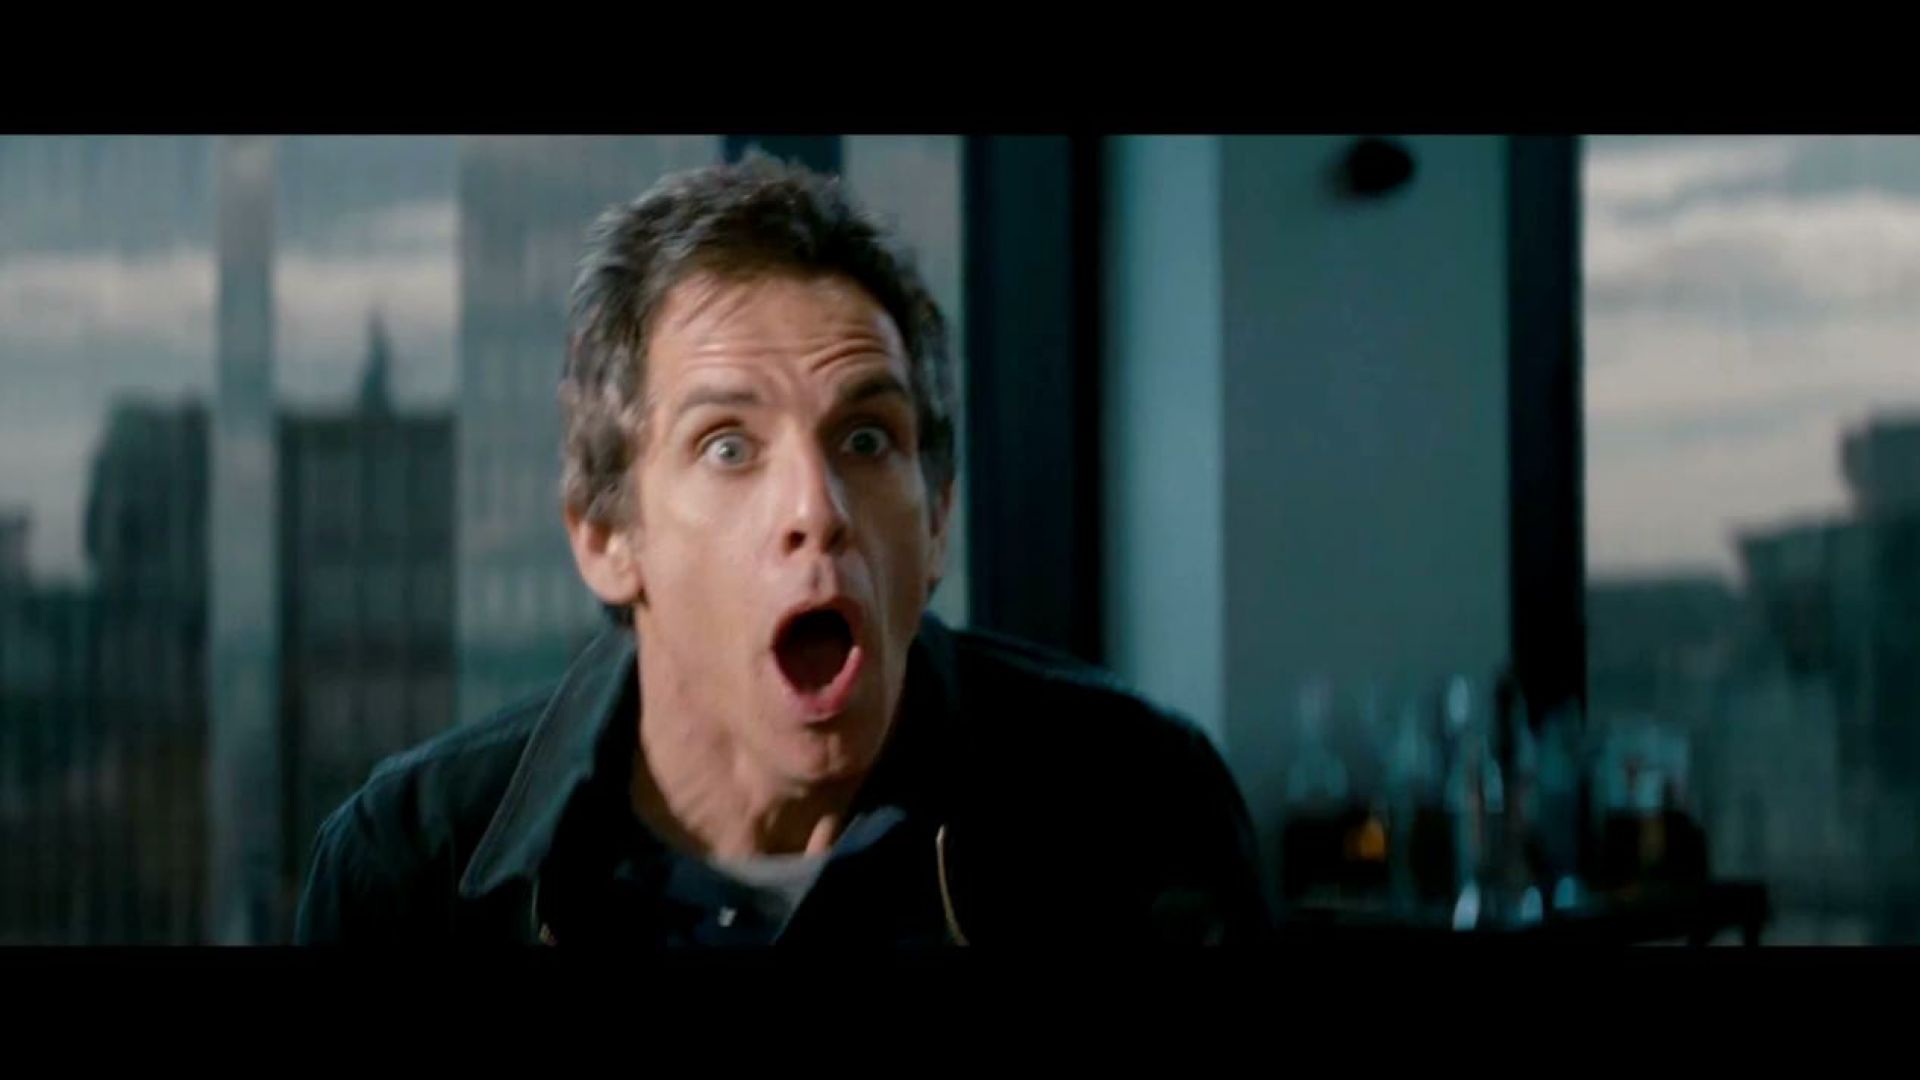 What you trying to steal? $20 million. Tower Heist